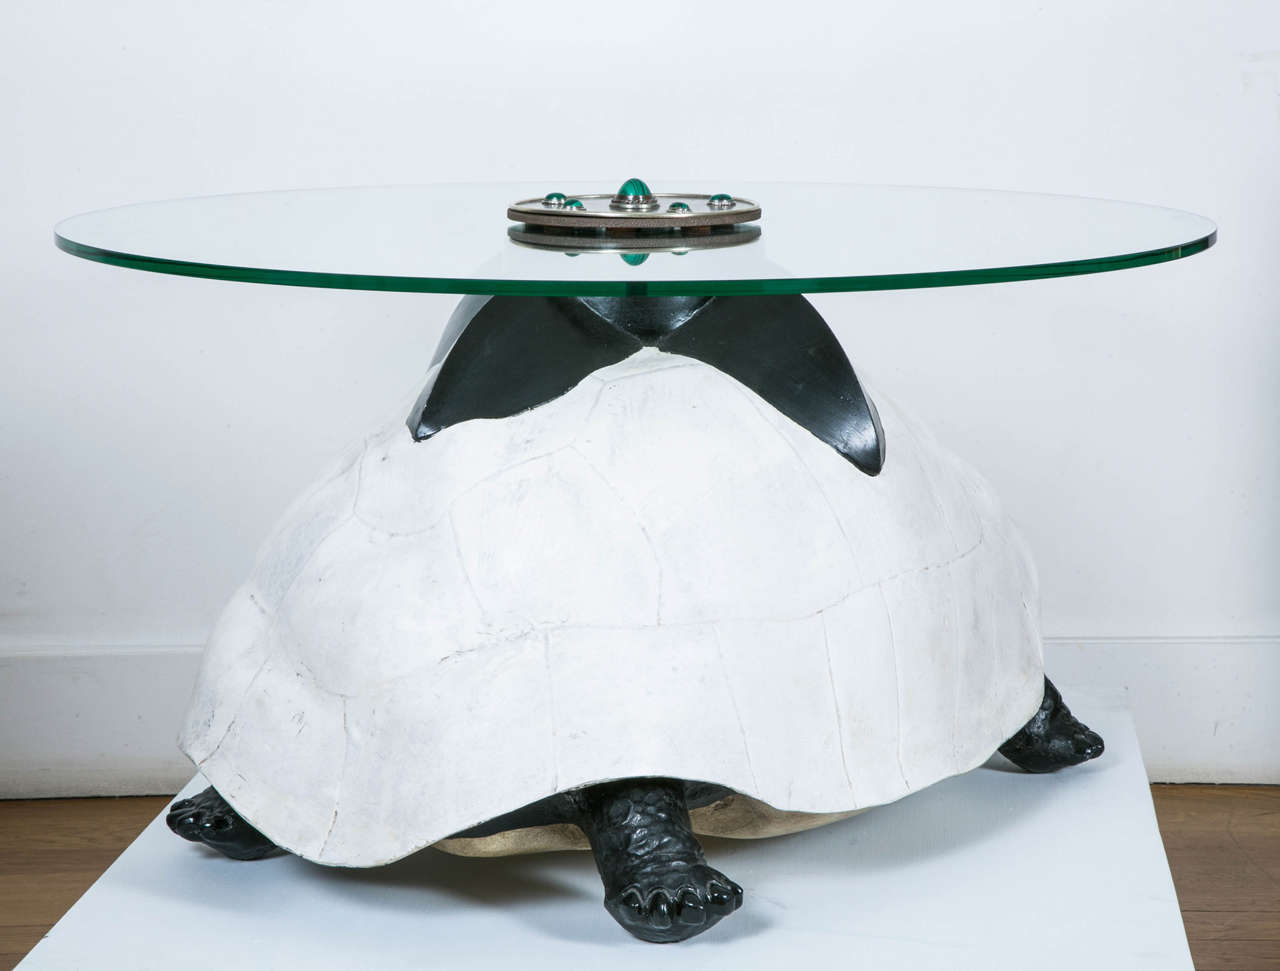 Late 20th Century Tortoise Coffee Table with Glass Top, 1970-1980 by Anthony Redmile